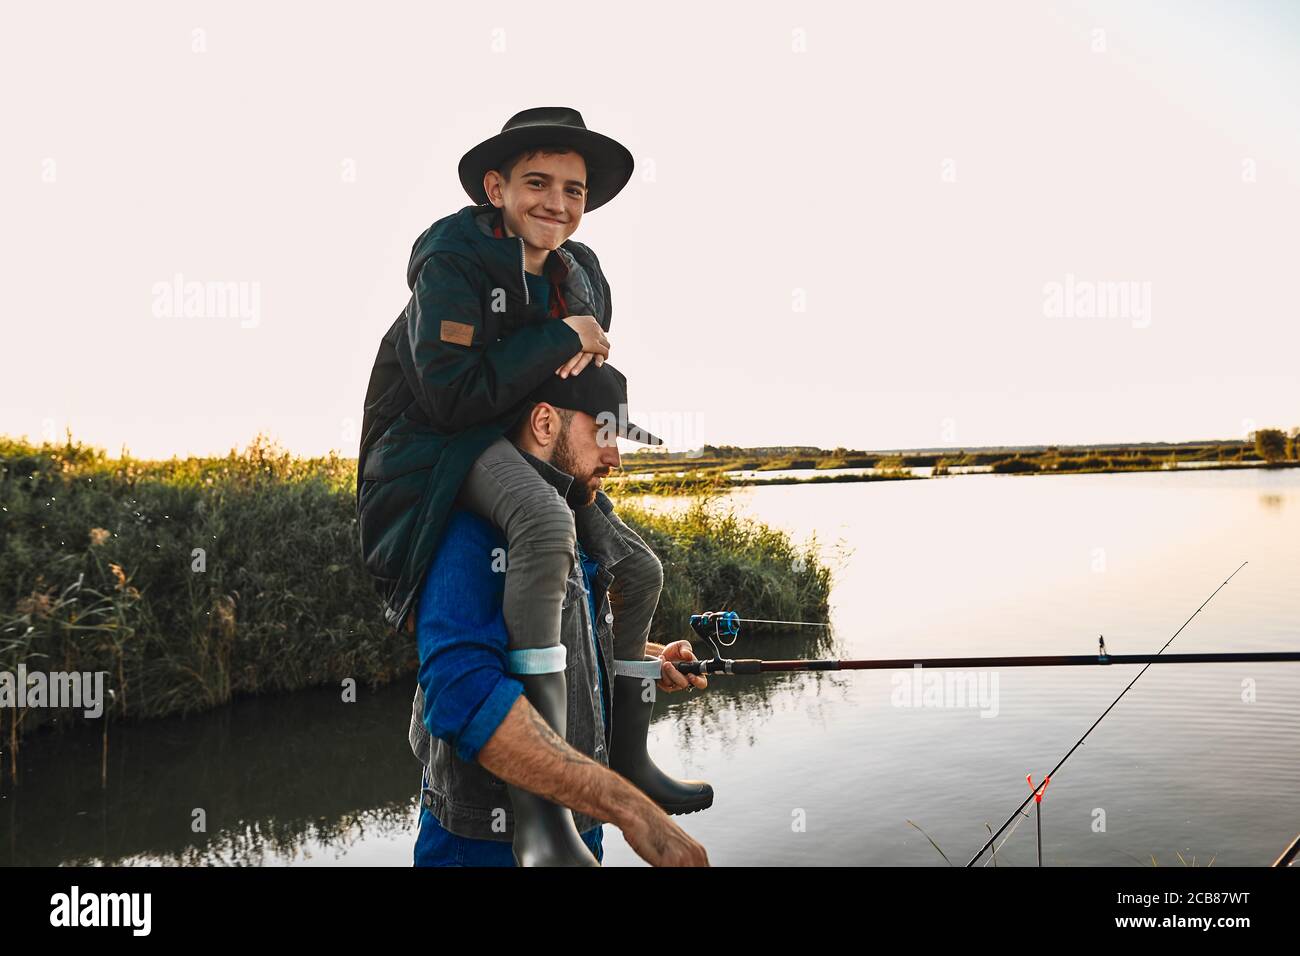 https://c8.alamy.com/comp/2CB87WT/father-and-son-have-fun-while-fishing-teen-boy-happy-and-smile-sit-on-father-shoulders-2CB87WT.jpg